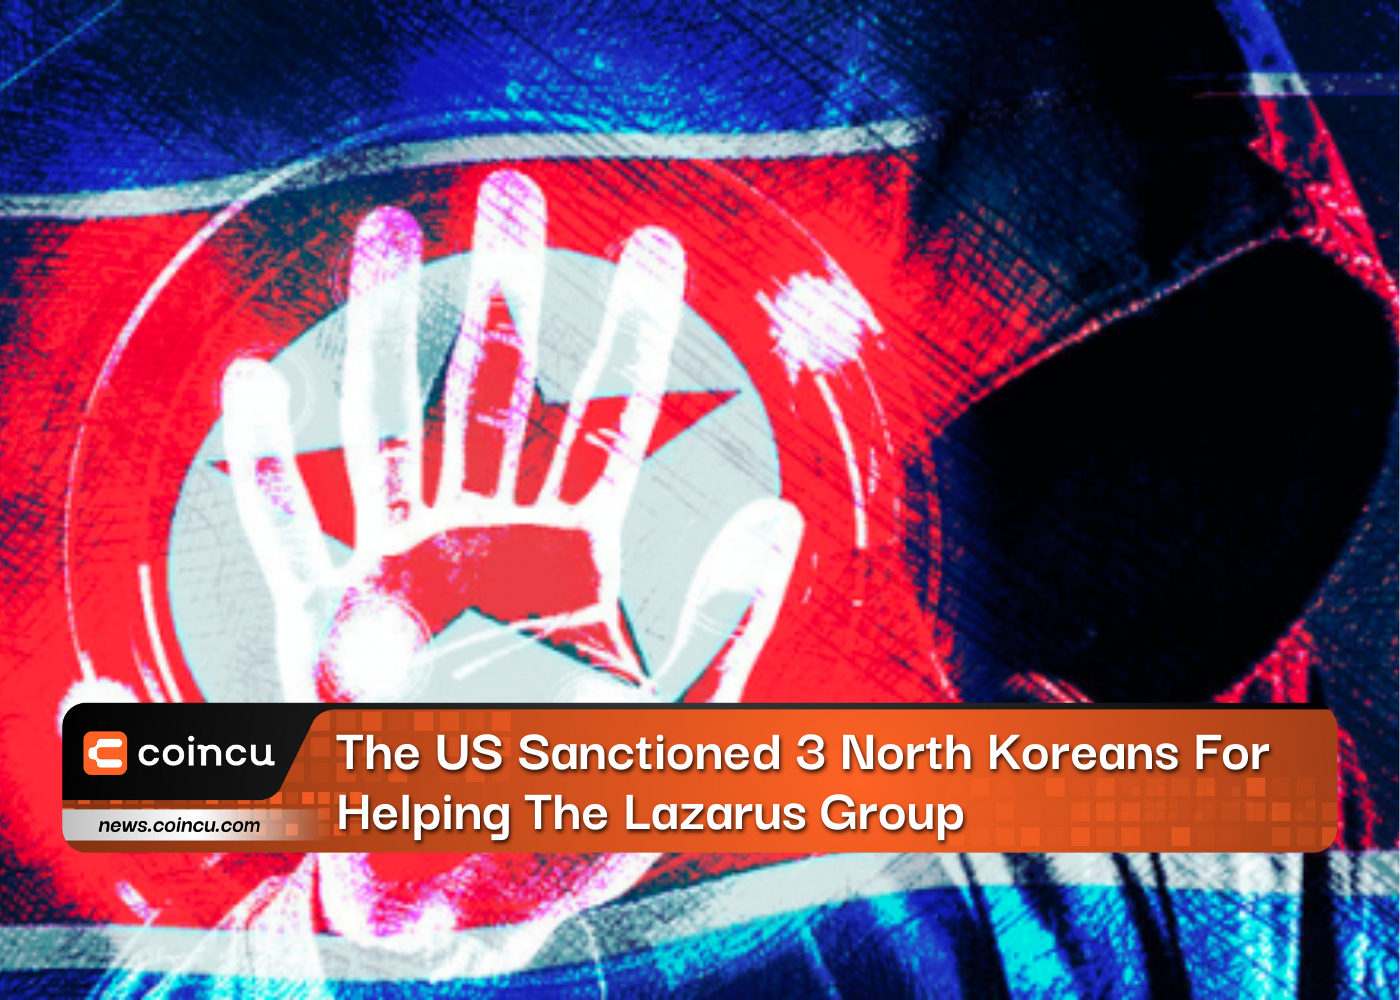 The US Sanctioned 3 North Koreans For Helping The Lazarus Group